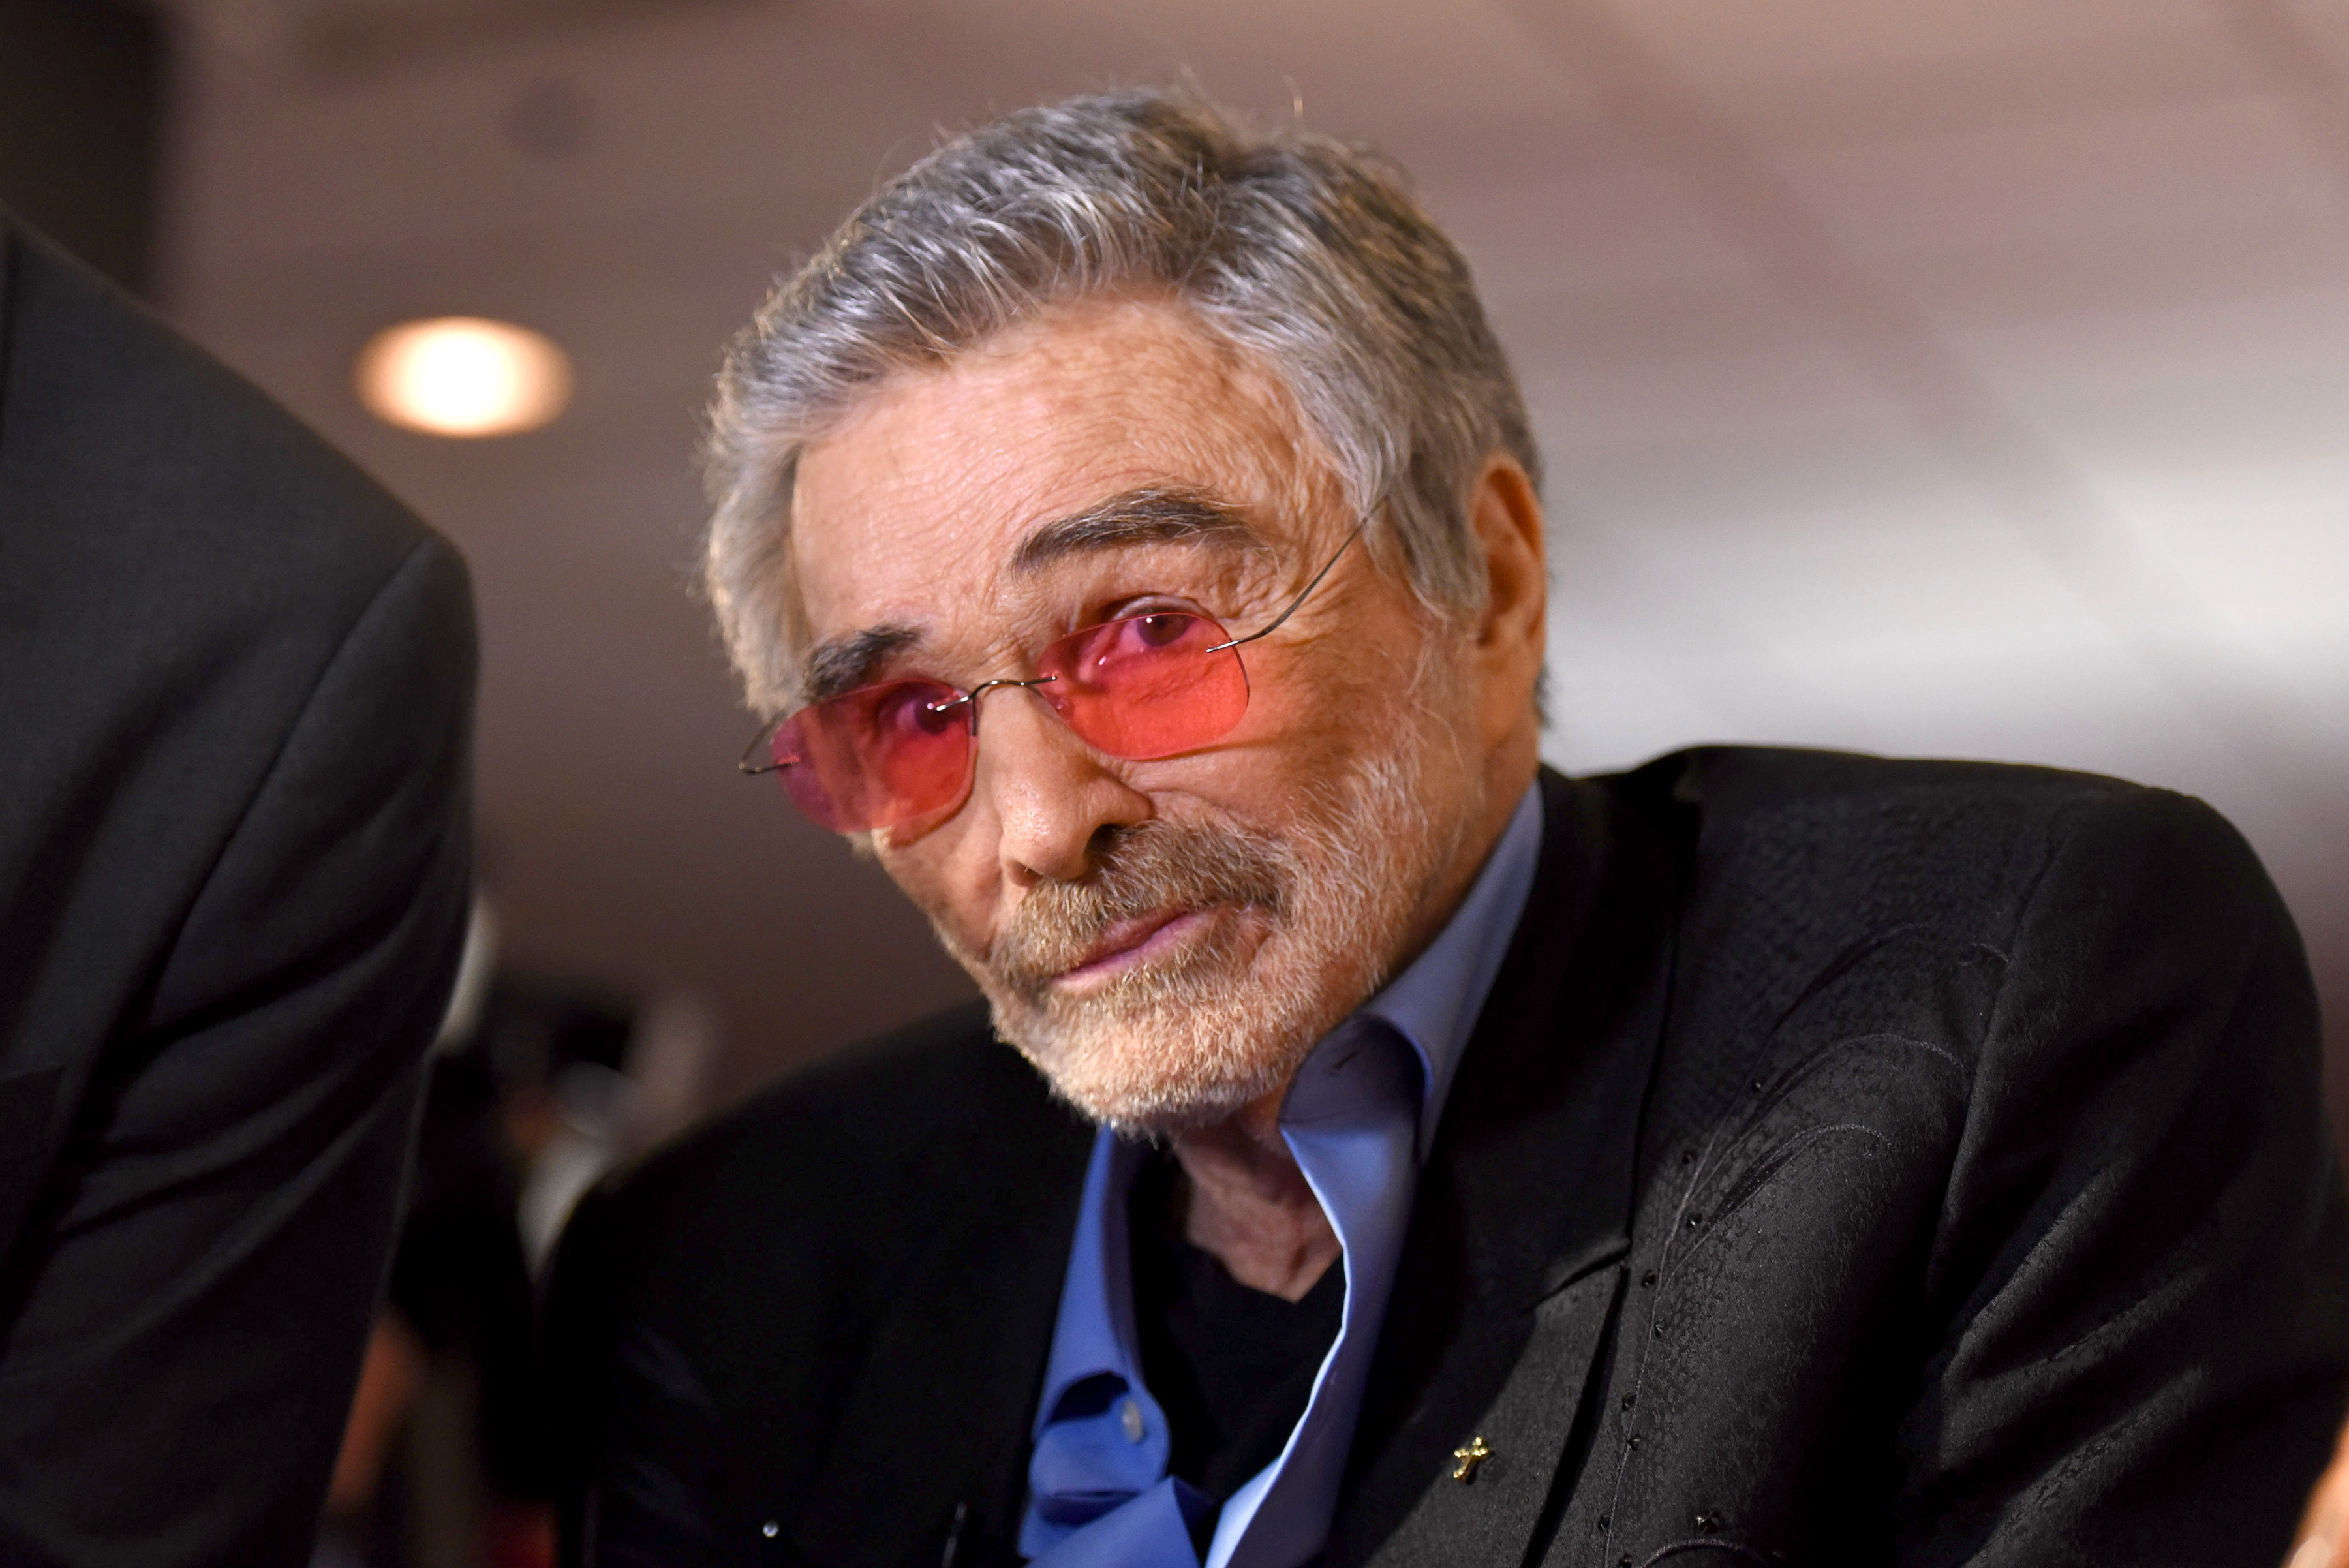 Actor Burt Reynolds at Cinepolis Chelsea on April 22, 2017, in New York City | Source: Getty Images